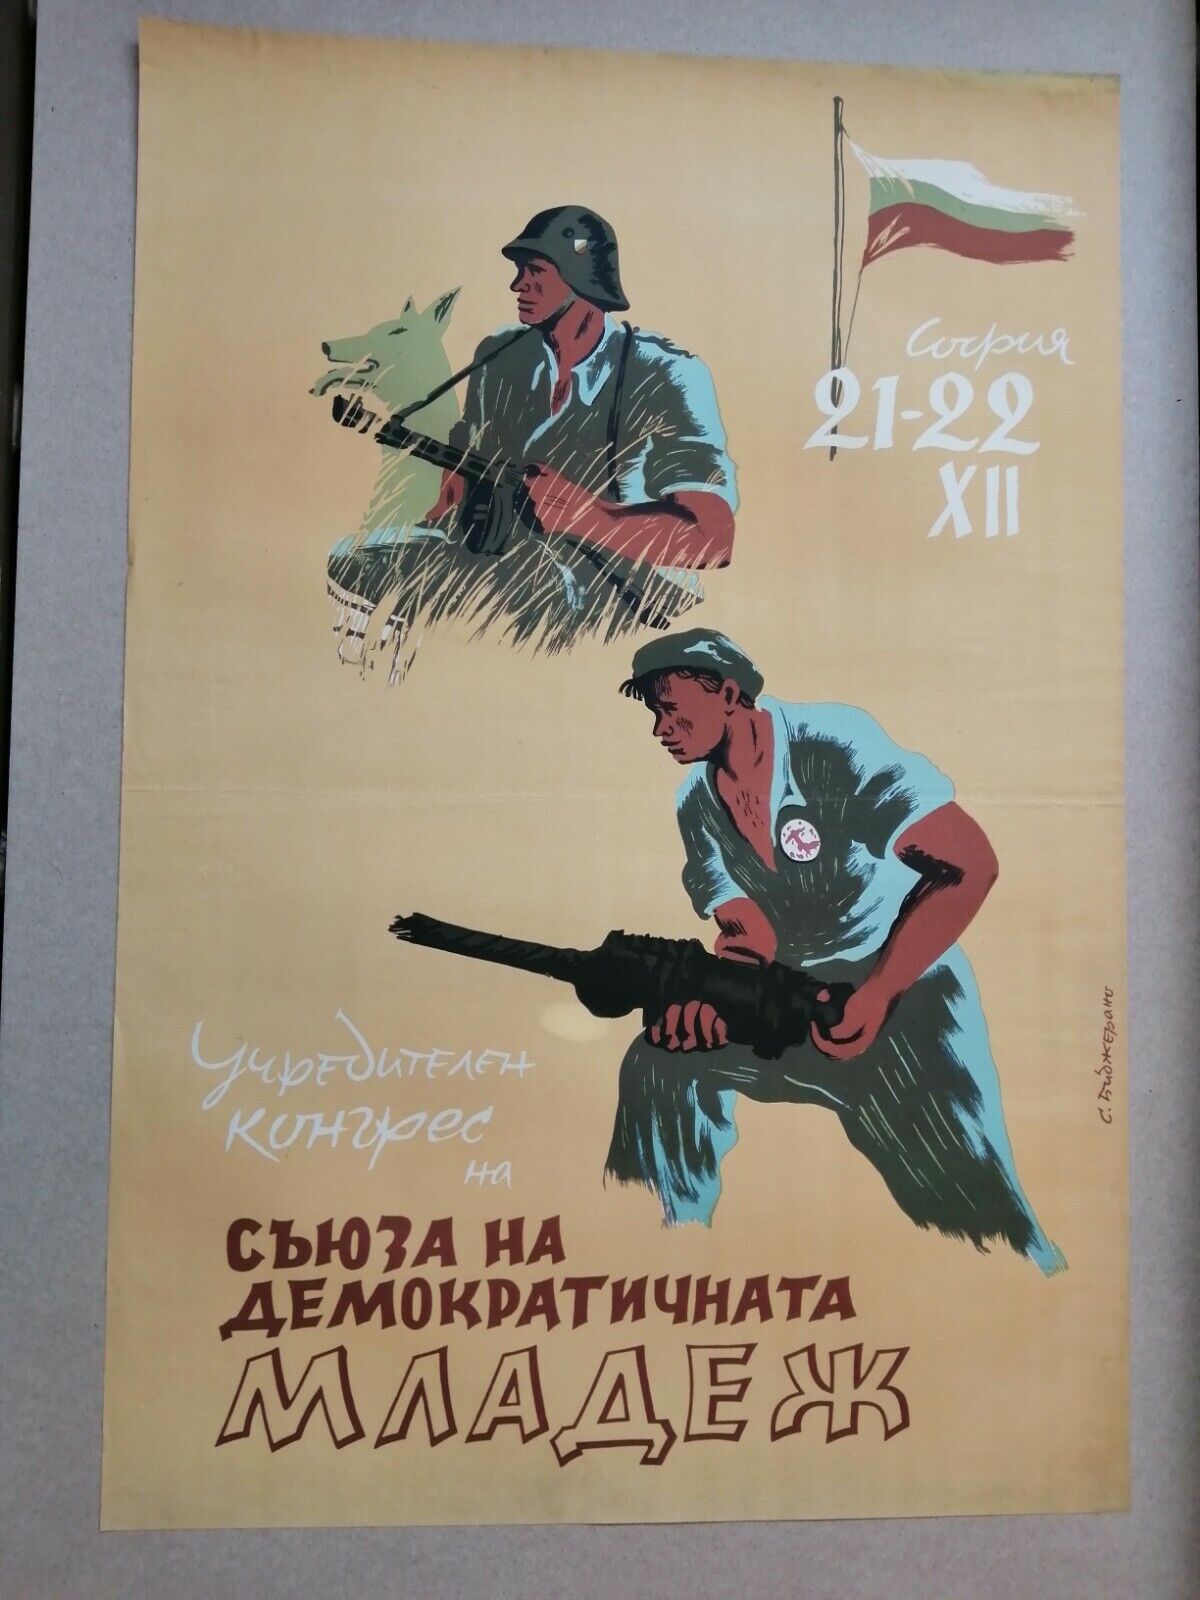 ORIGINAL PROPAGANDA UNION OF YOUTH POSTER VINTAGE MILITARY COMMUNIST POSTER